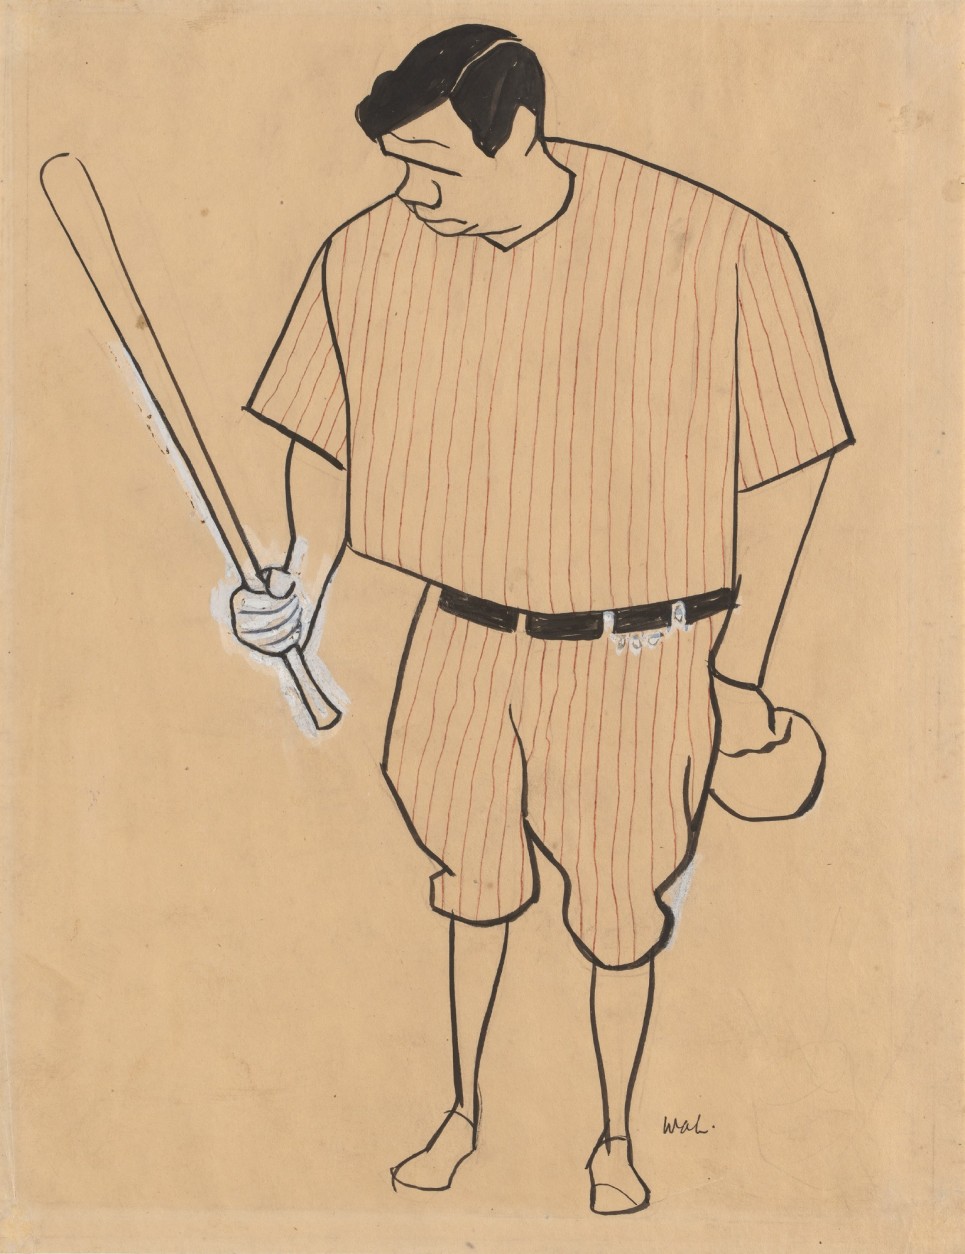 "Babe Ruth" by William Auerbach-Levy. (Courtesy Smithsonian Institution)